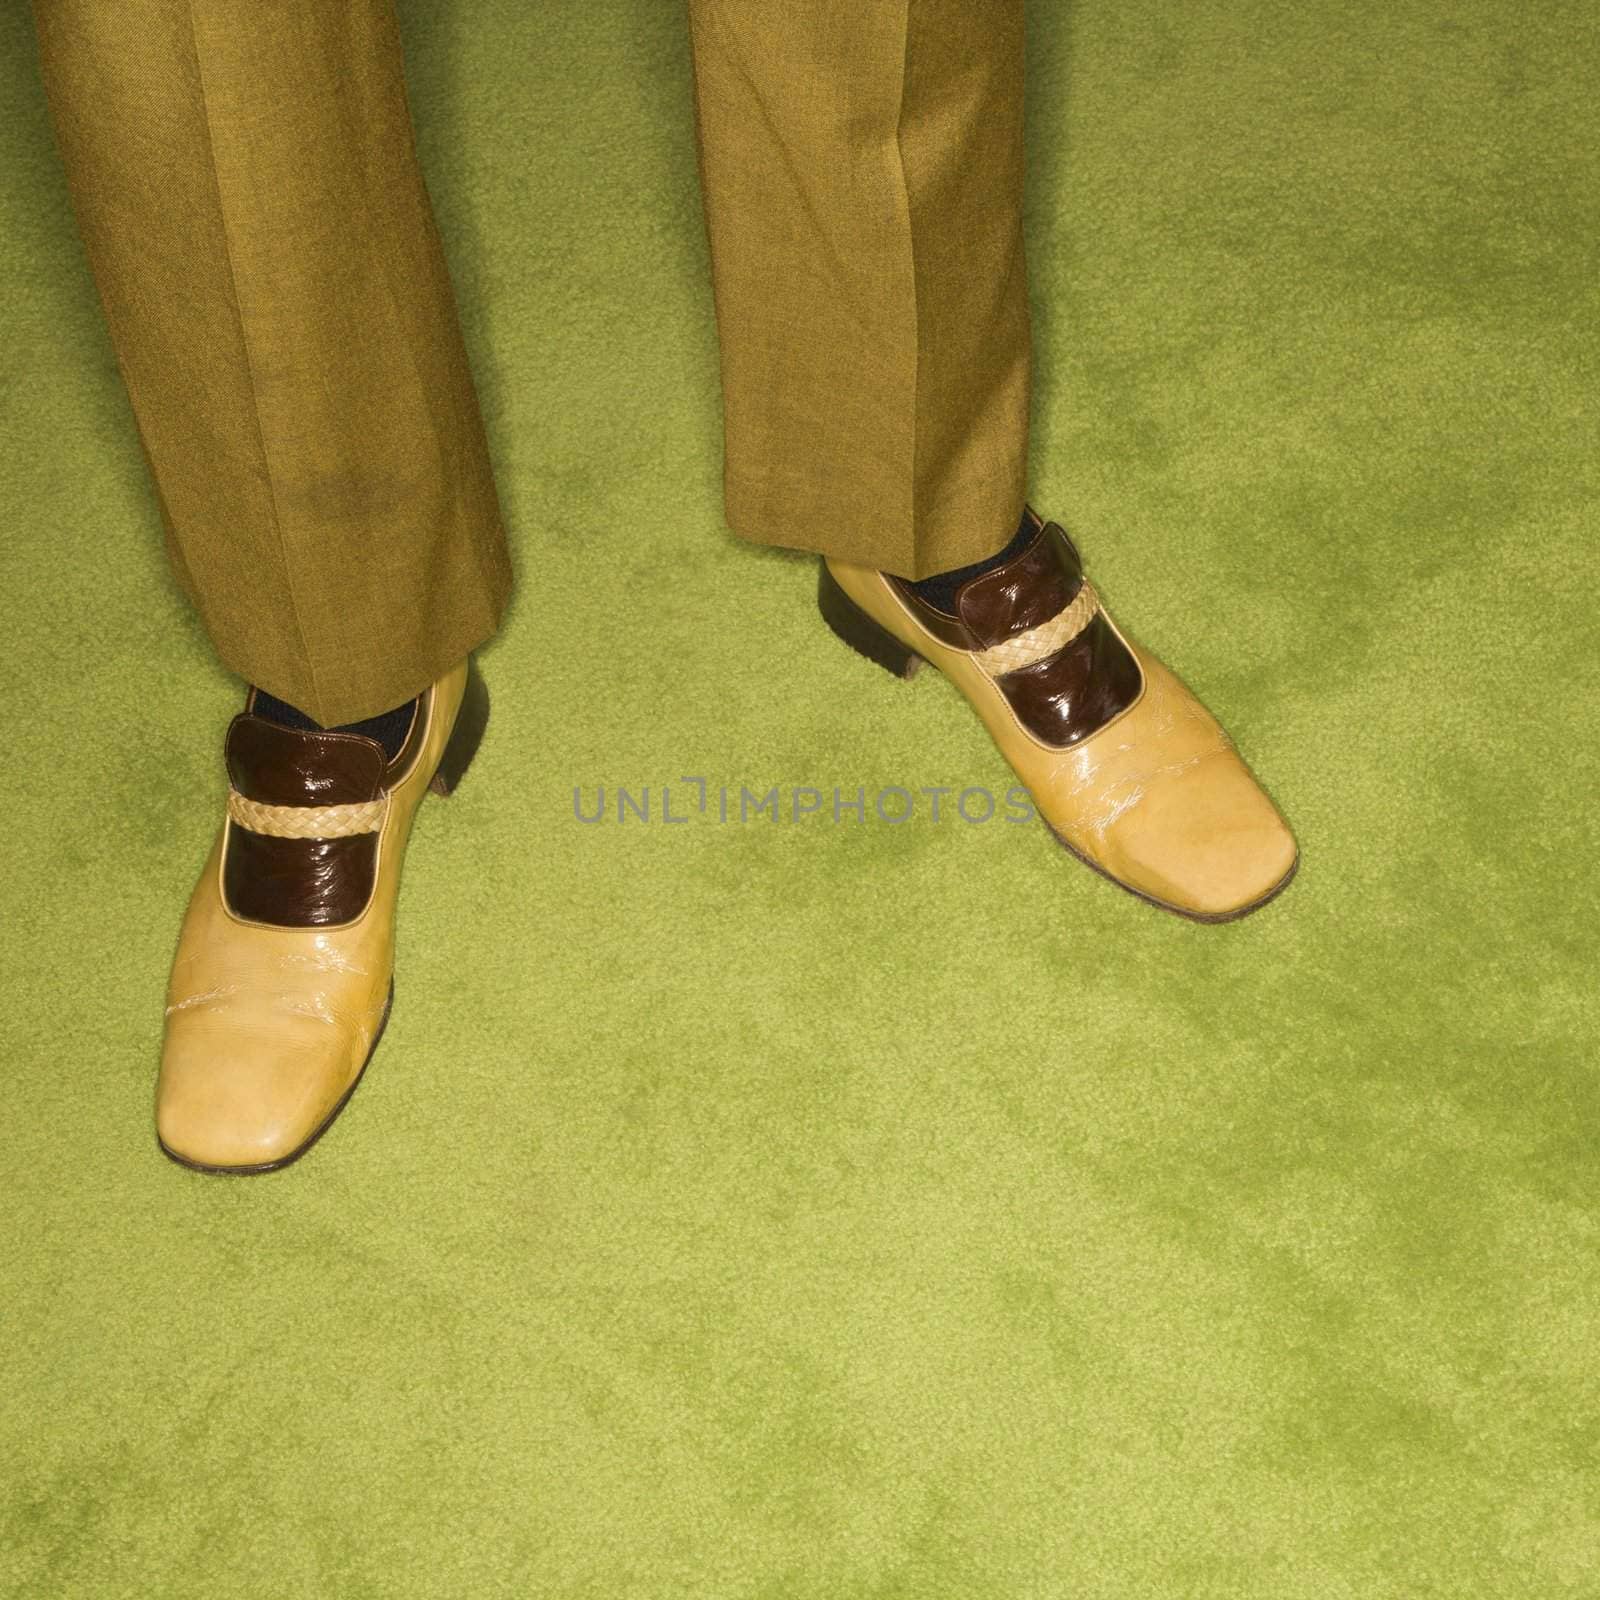 Close-up of Caucasian mid-adult male feet in vintage shoes against green rug.